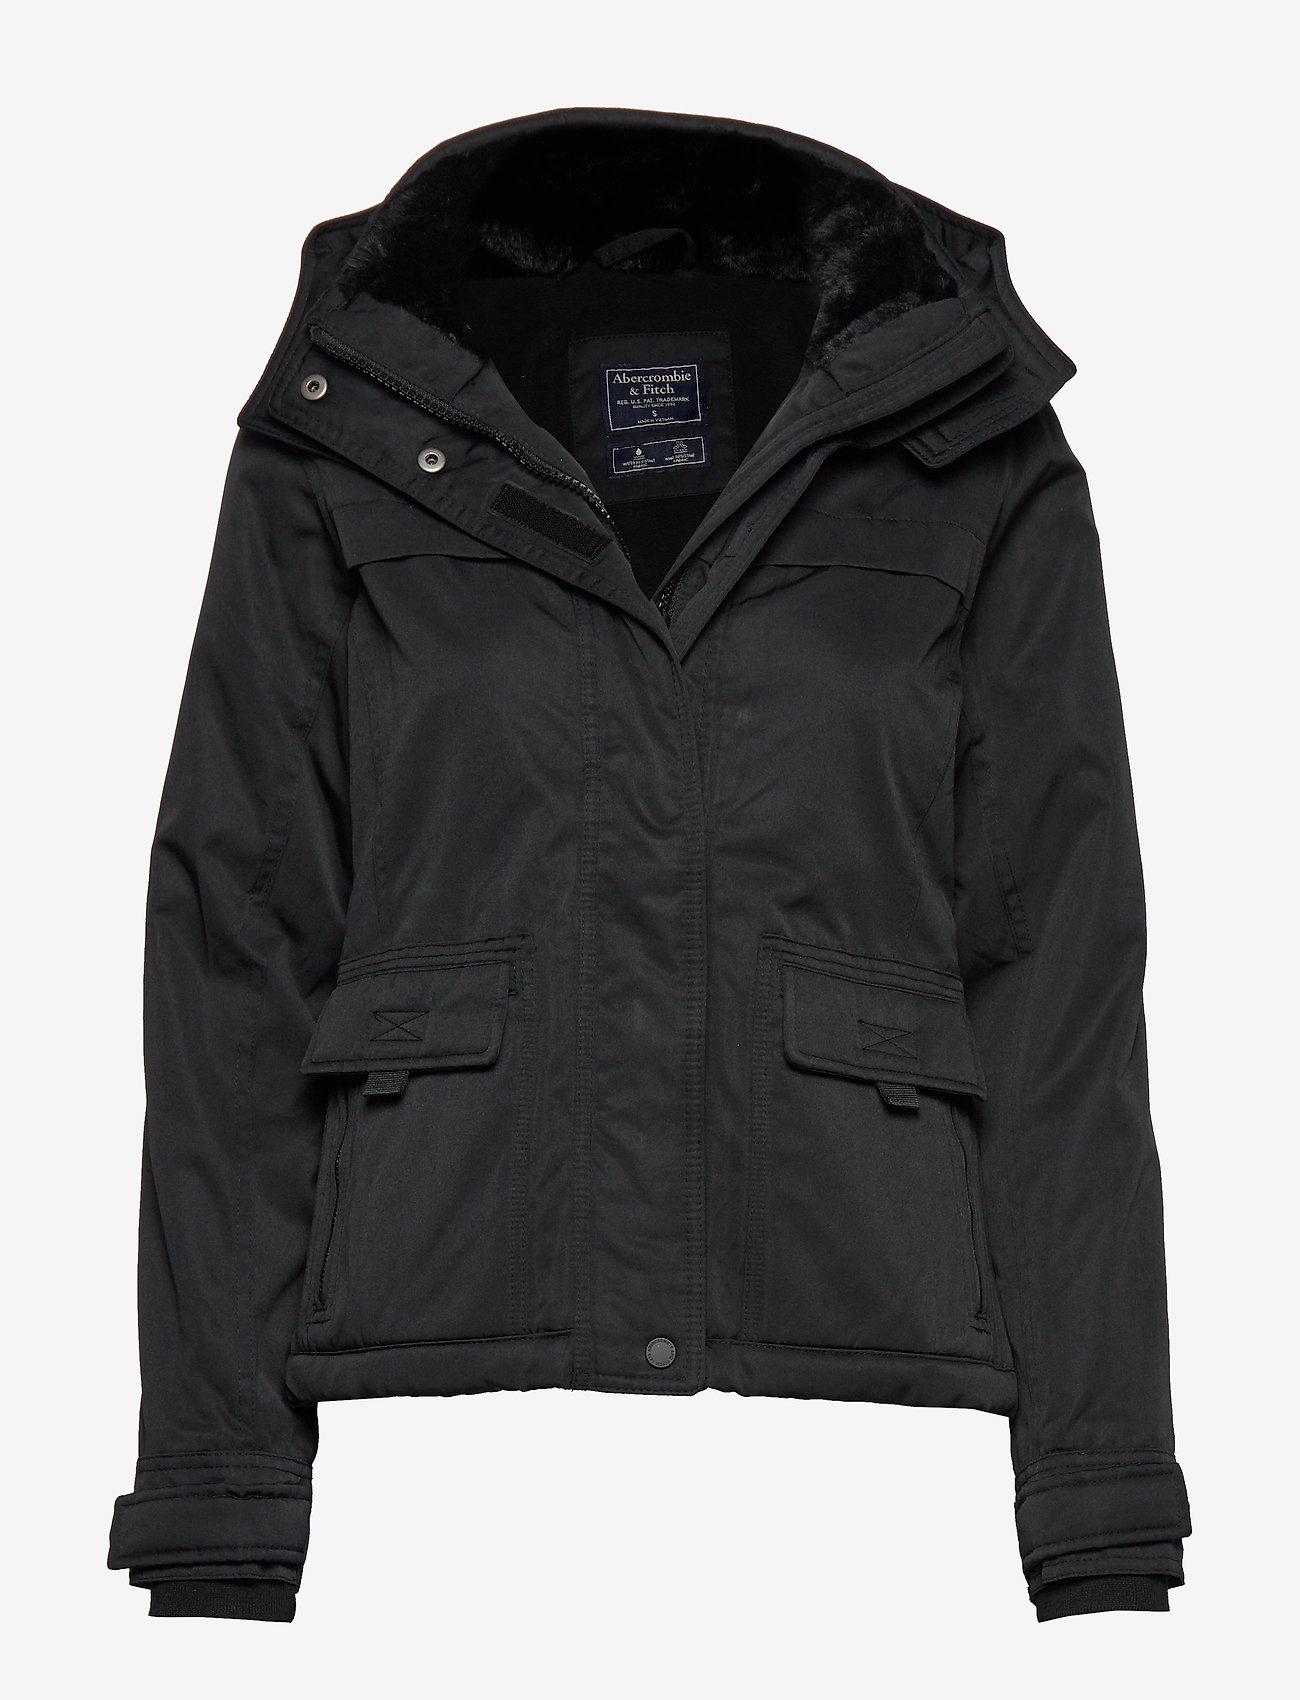 abercrombie and fitch outerwear